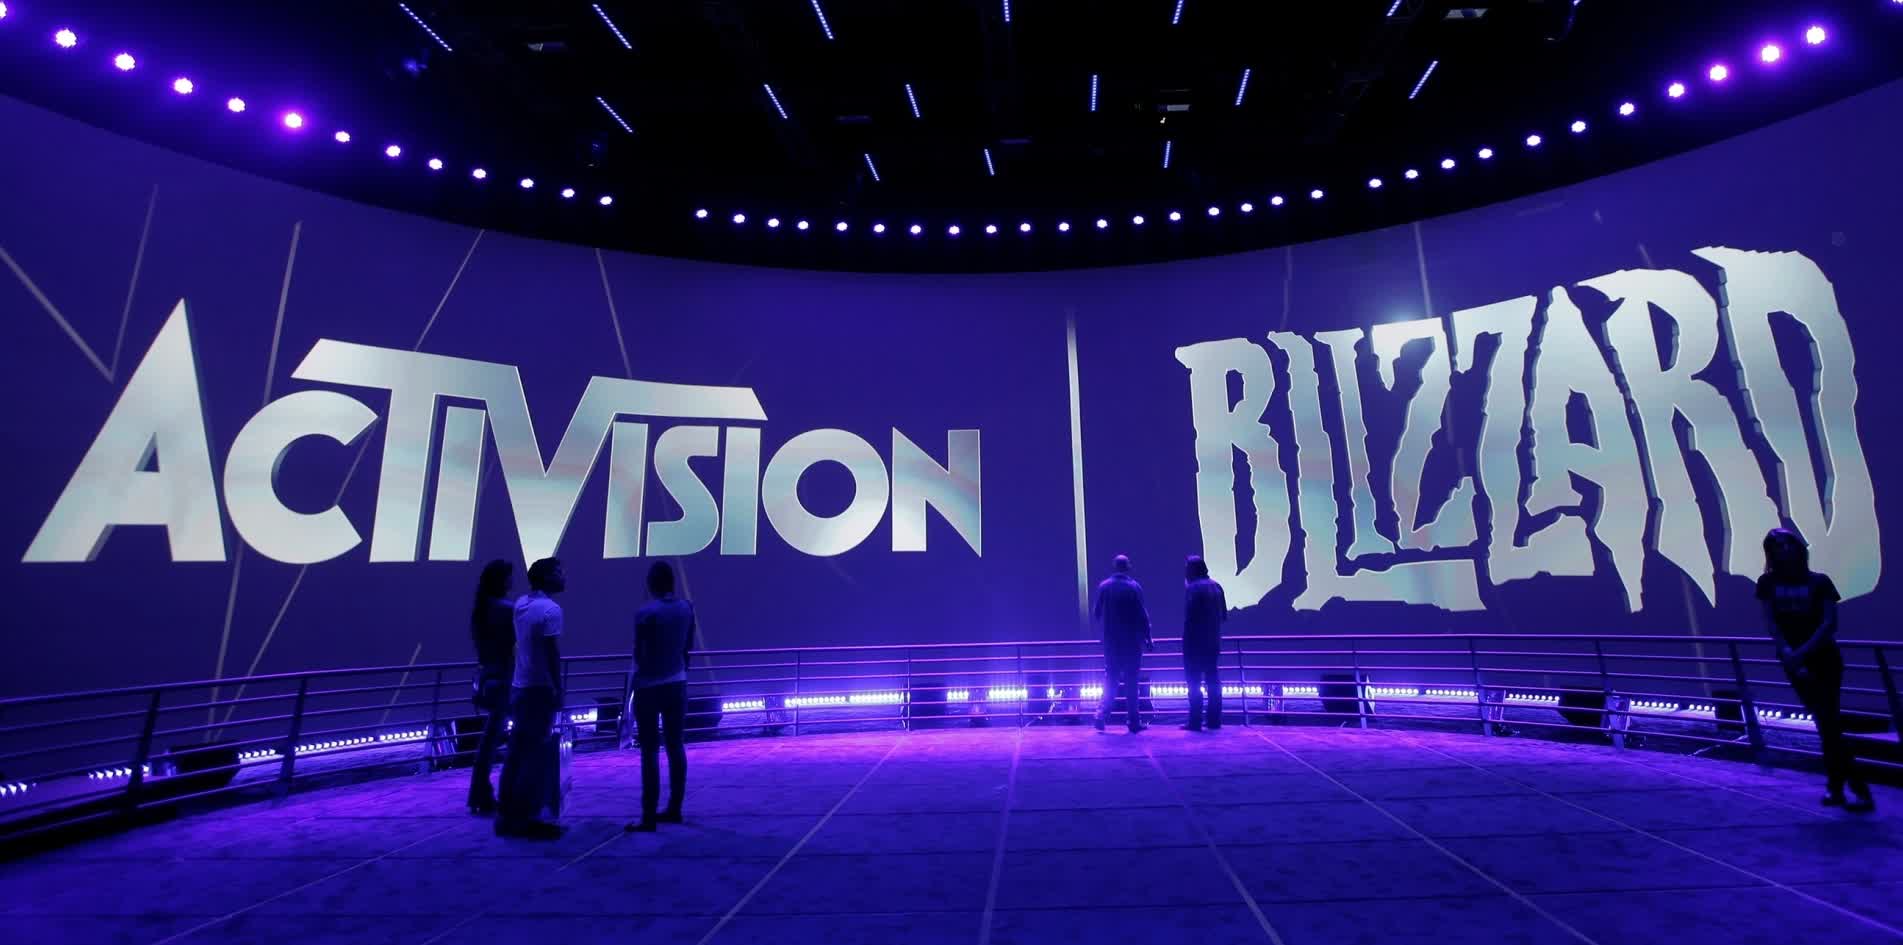 Activision Blizzard lost 63 million monthly active users over the last year